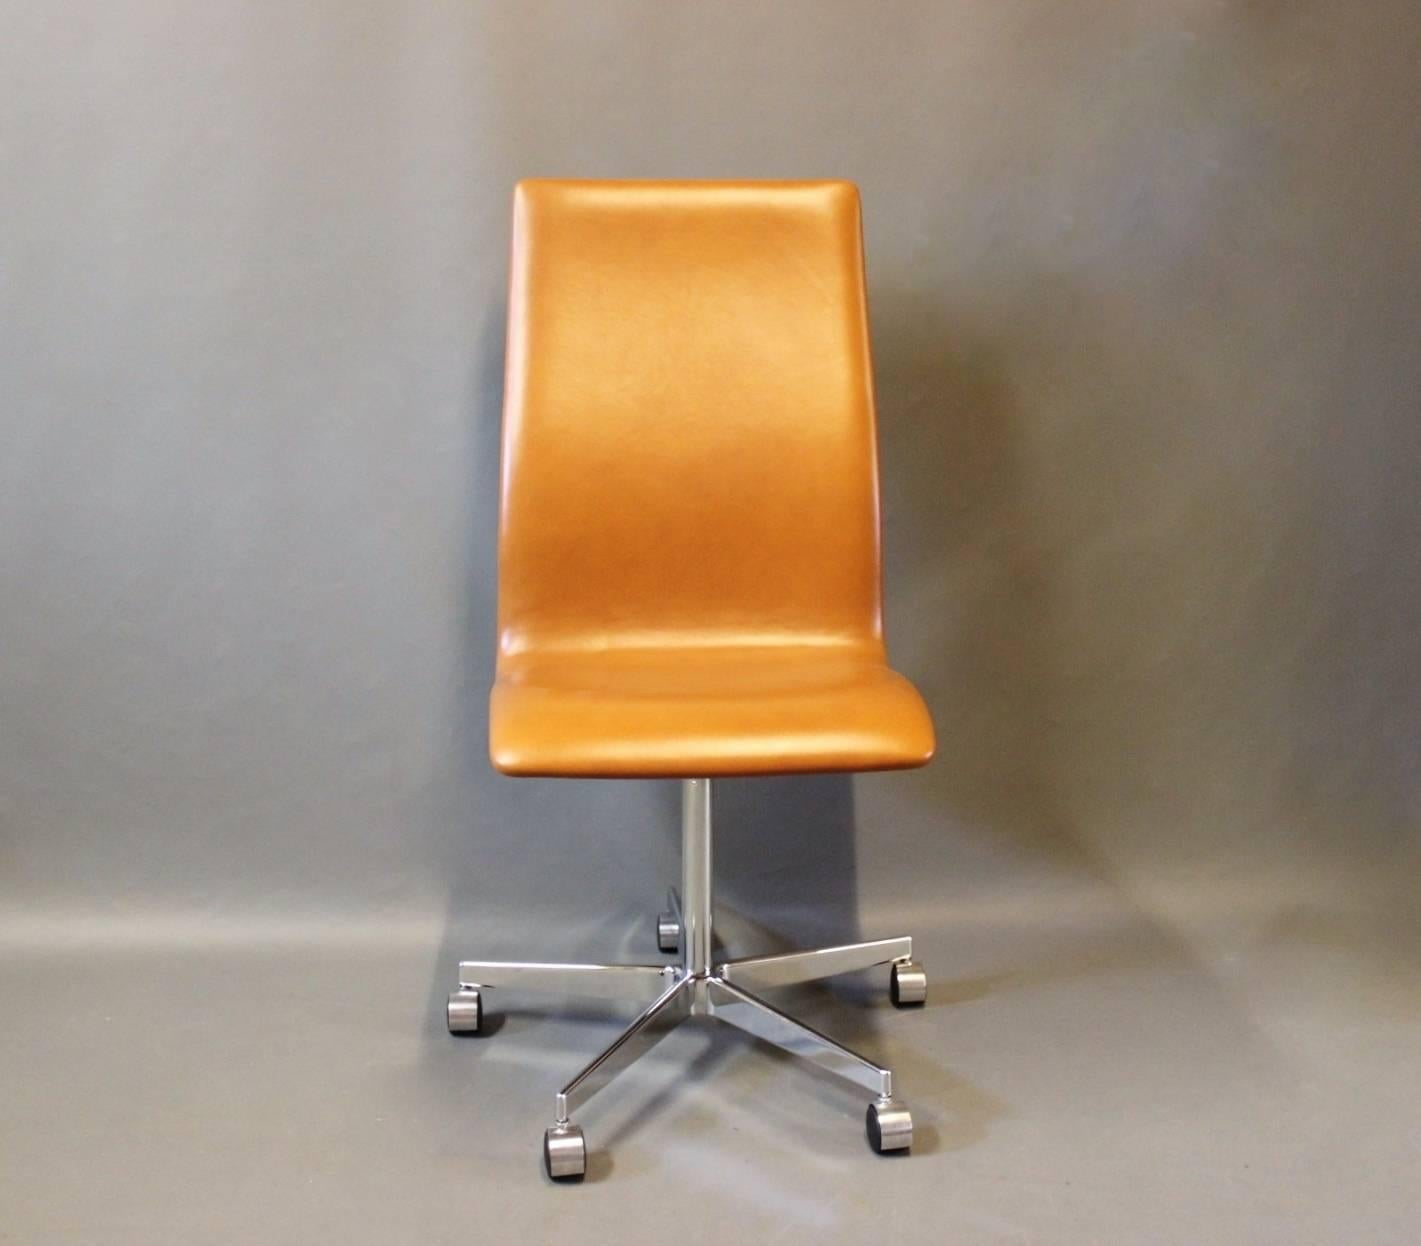 The Oxford Classic office chair, model 3193C, in cognac colored savanne leather designed by Arne Jacobsen in 1963 and manufactured by Fritz Hansen. The chair is with original upholstery.